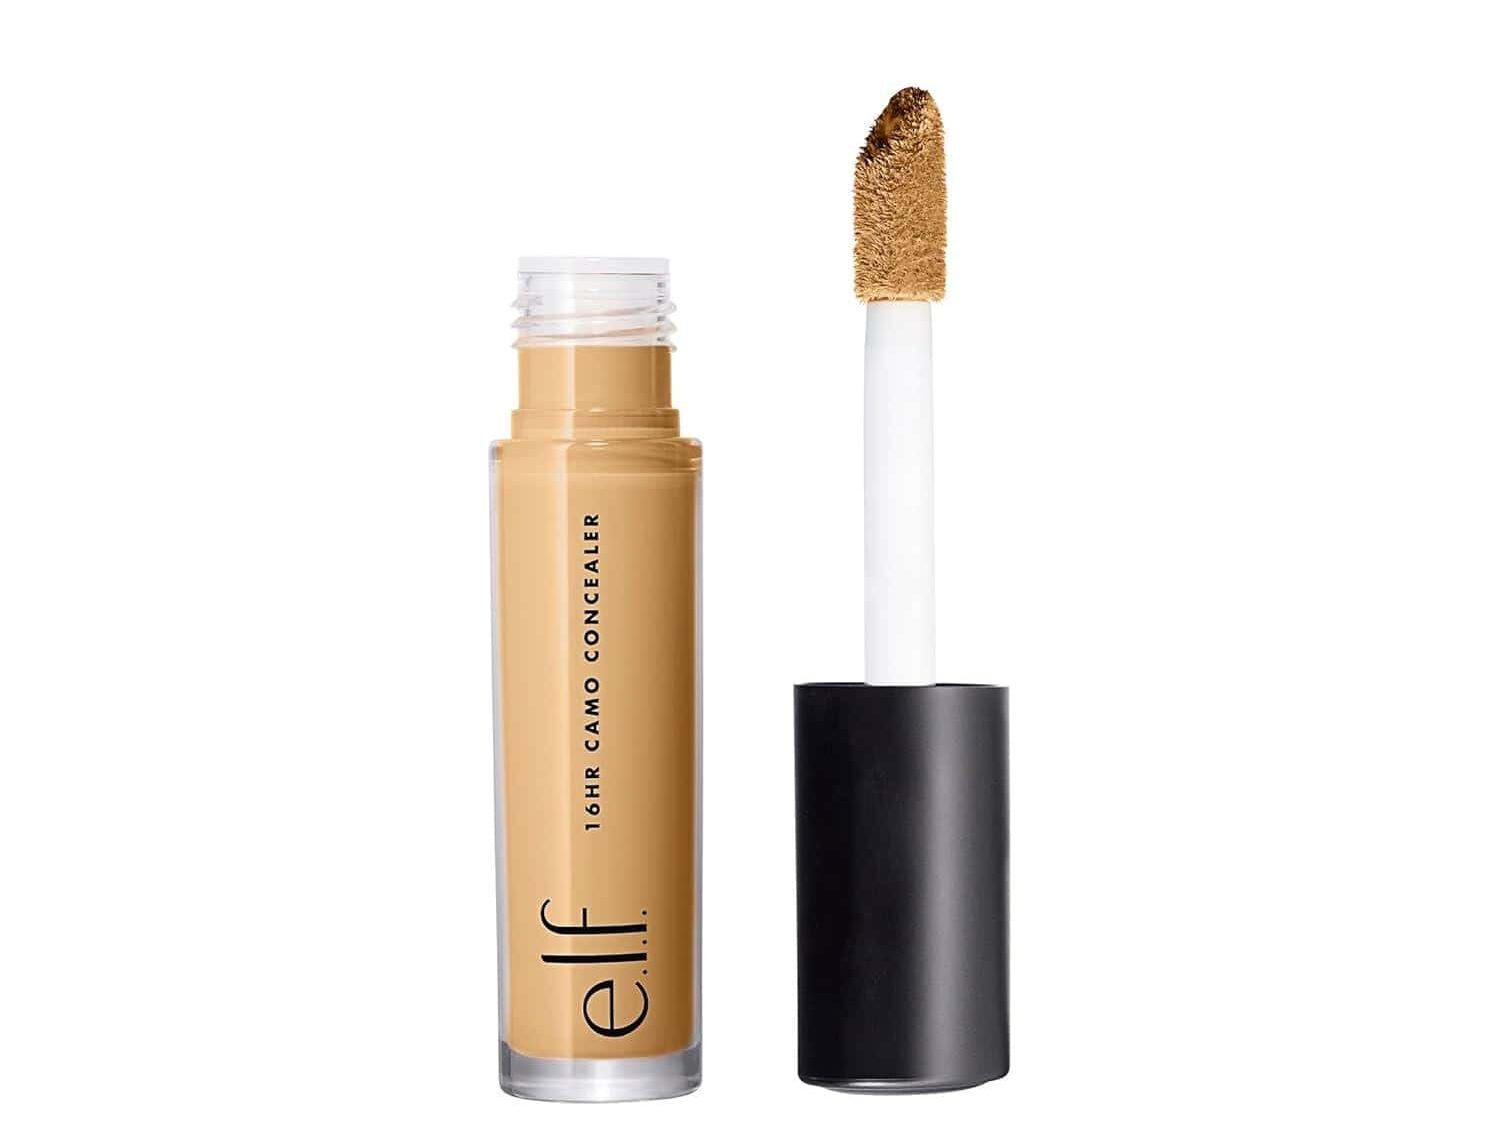 super affordable concealers for anti-aging. With shine control, an extensive shade range, and full coverage capabilities, tackle dark circles effortlessly.